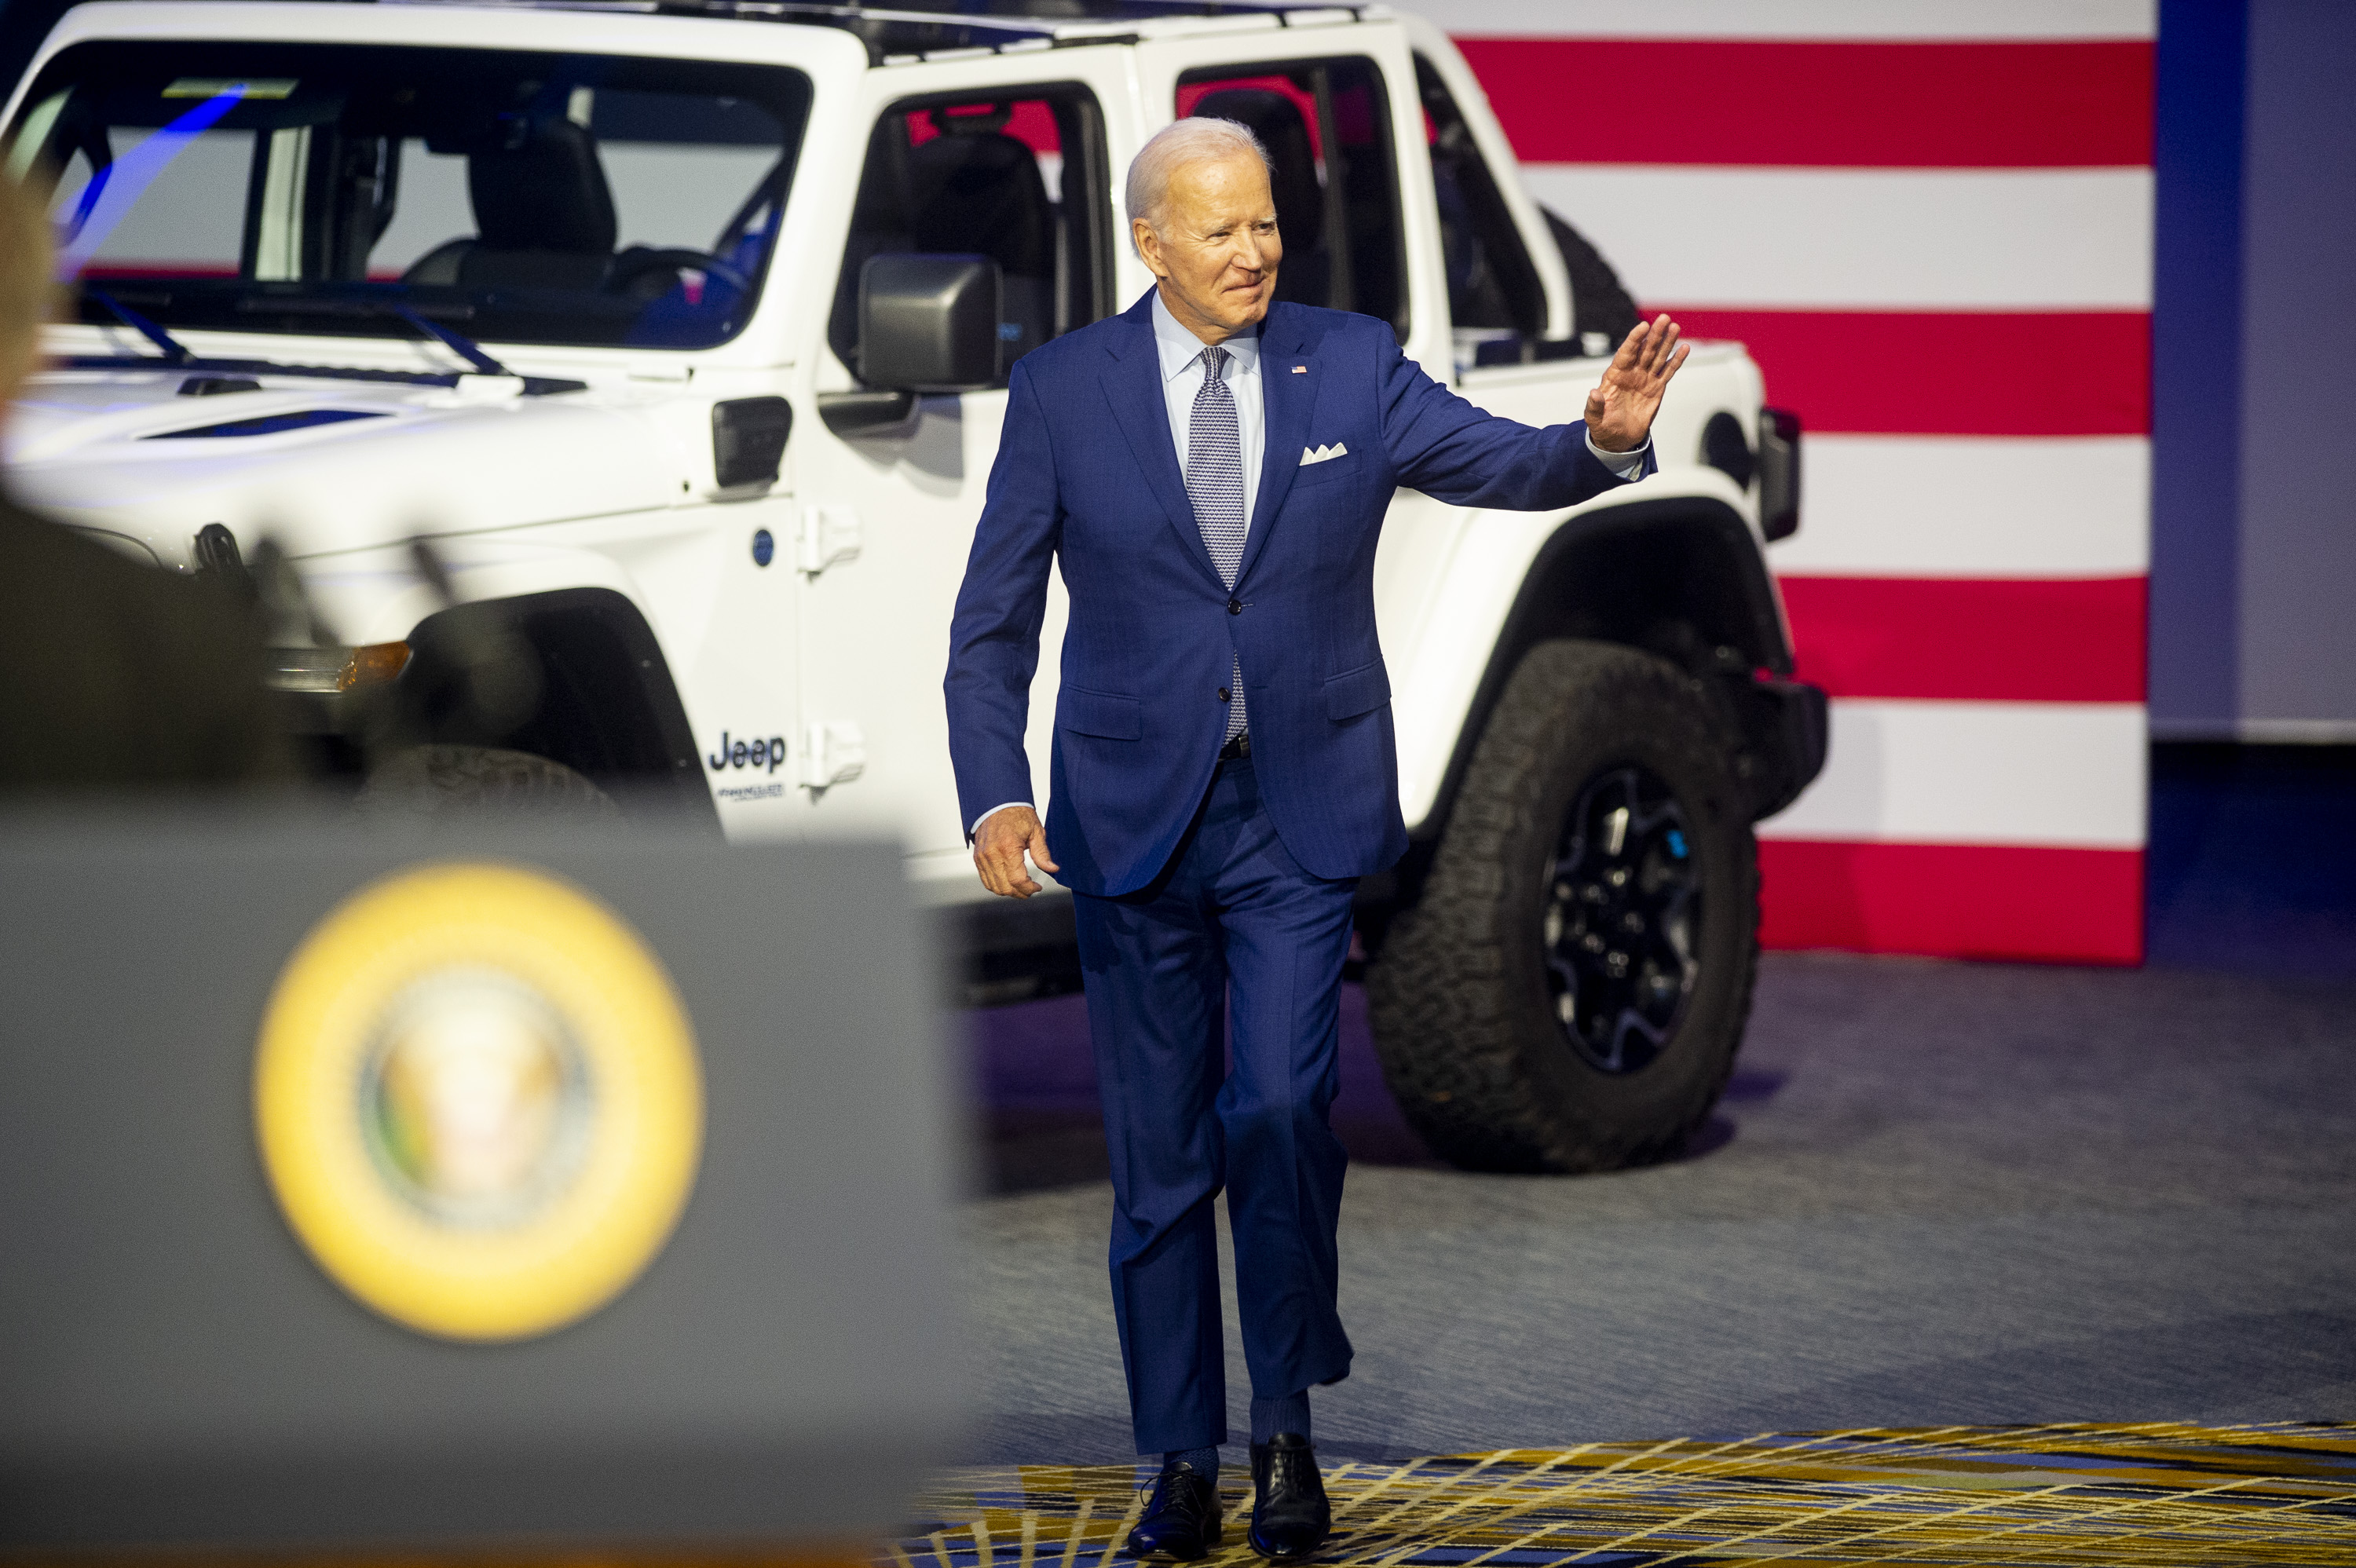 U.S. President Joe Biden greets supporters during the 2022 North American International Auto Show at Huntington Place in Detroit on Wednesday, Sept. 14 2022.